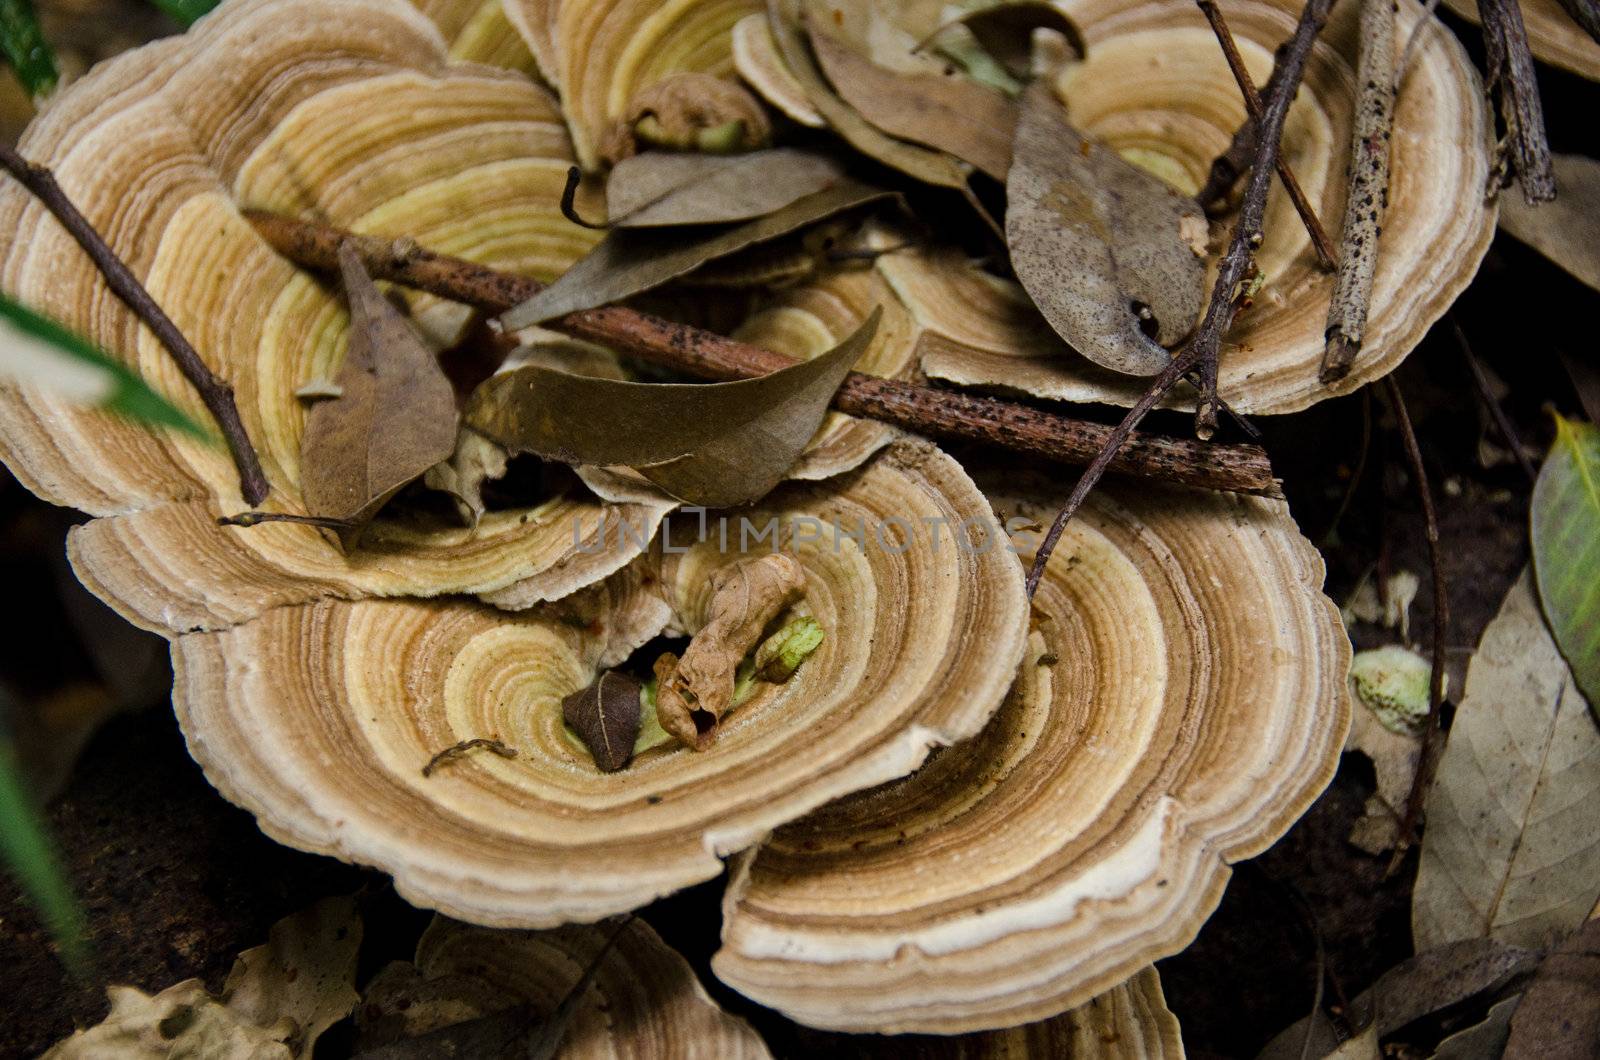 Japanese tree mushroom with brown and grey rings on the forest floor